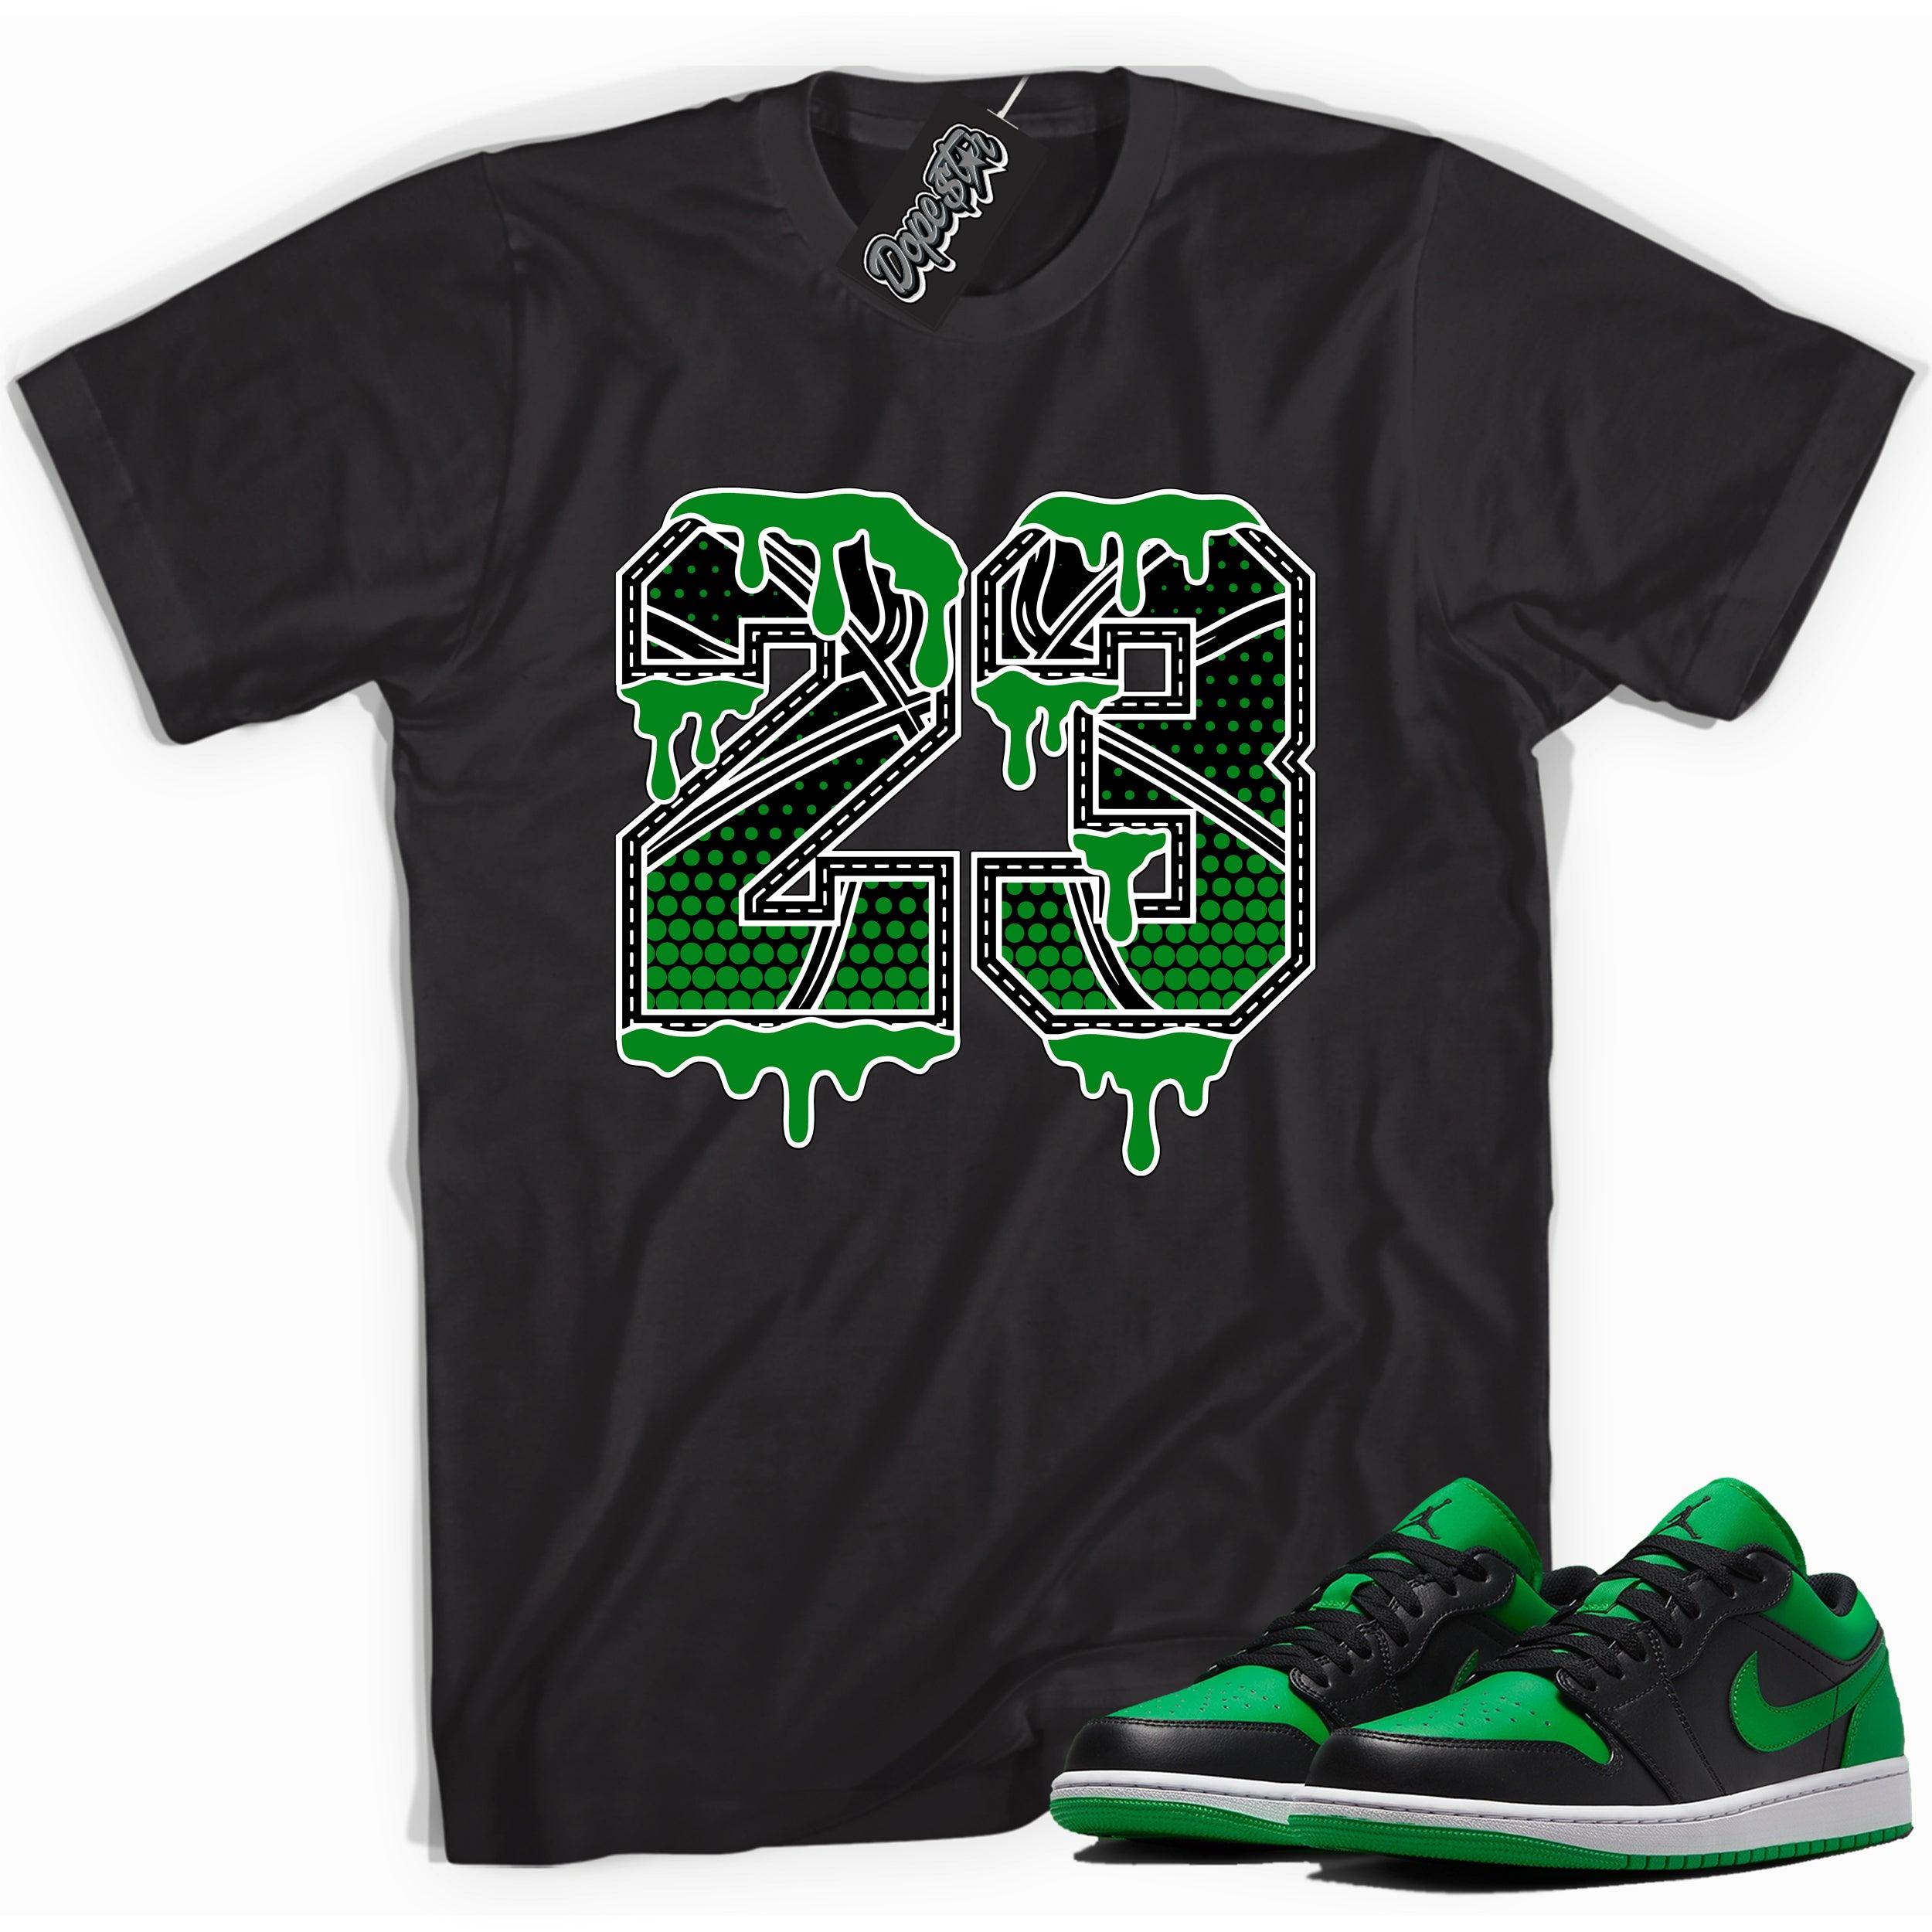 Cool black graphic tee with '23 BasketBall' print, that perfectly matches Air Jordan 1 Low Lucky Green sneakers